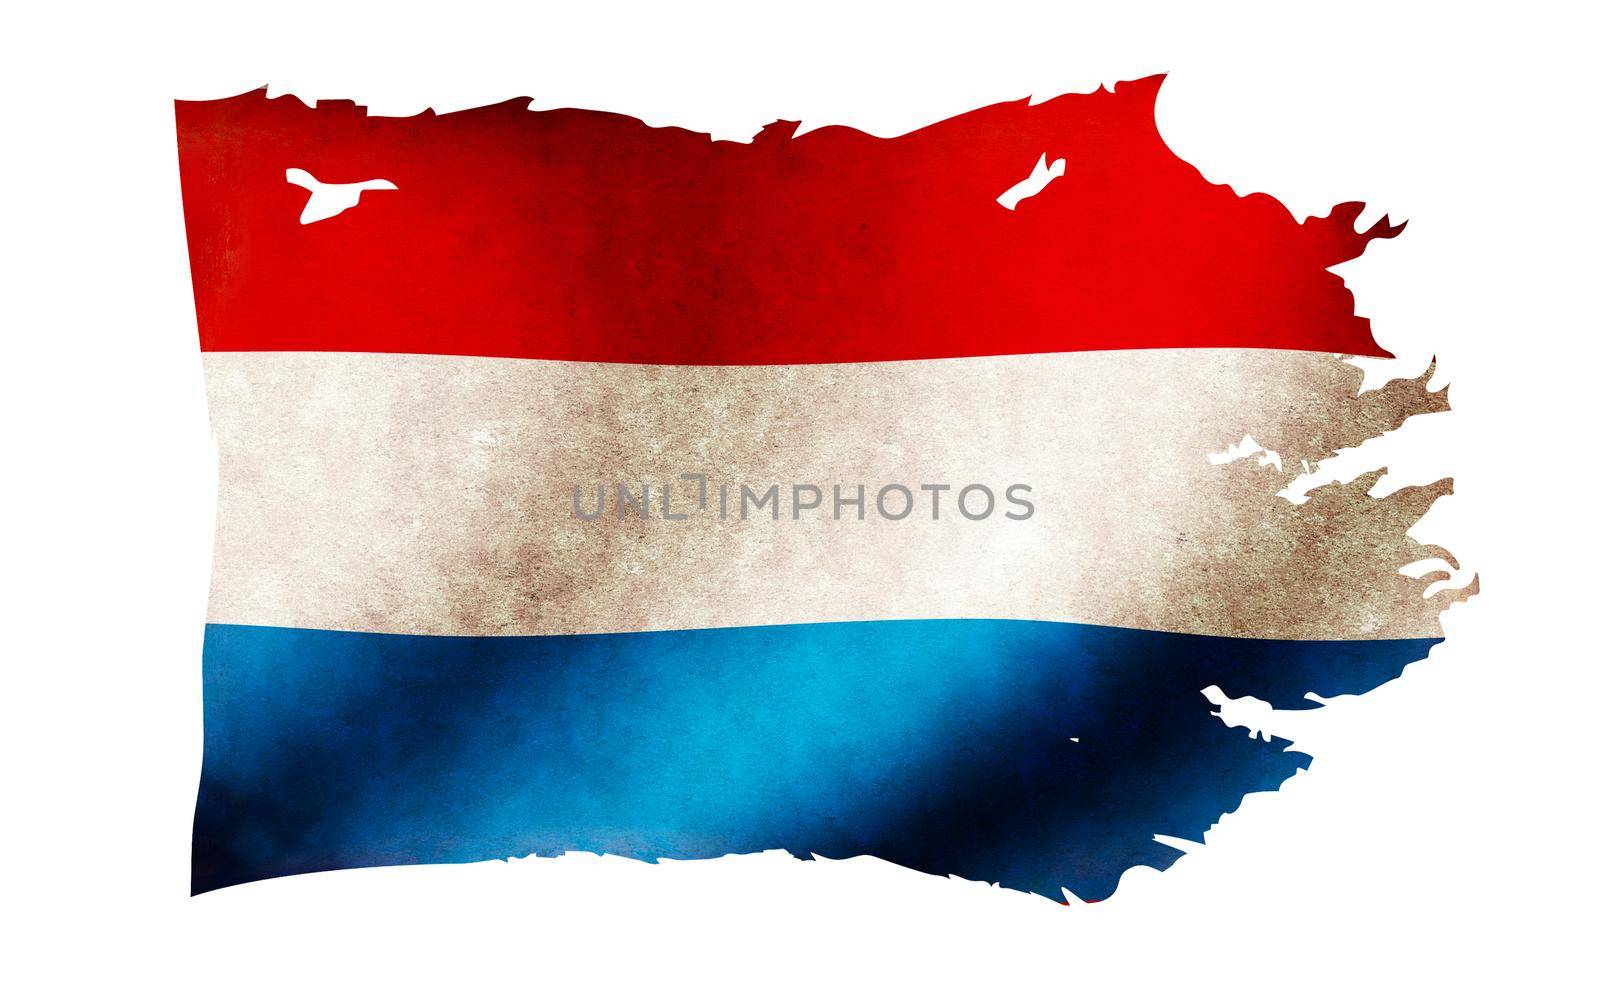 Dirty and torn country flag illustration / Netherlands